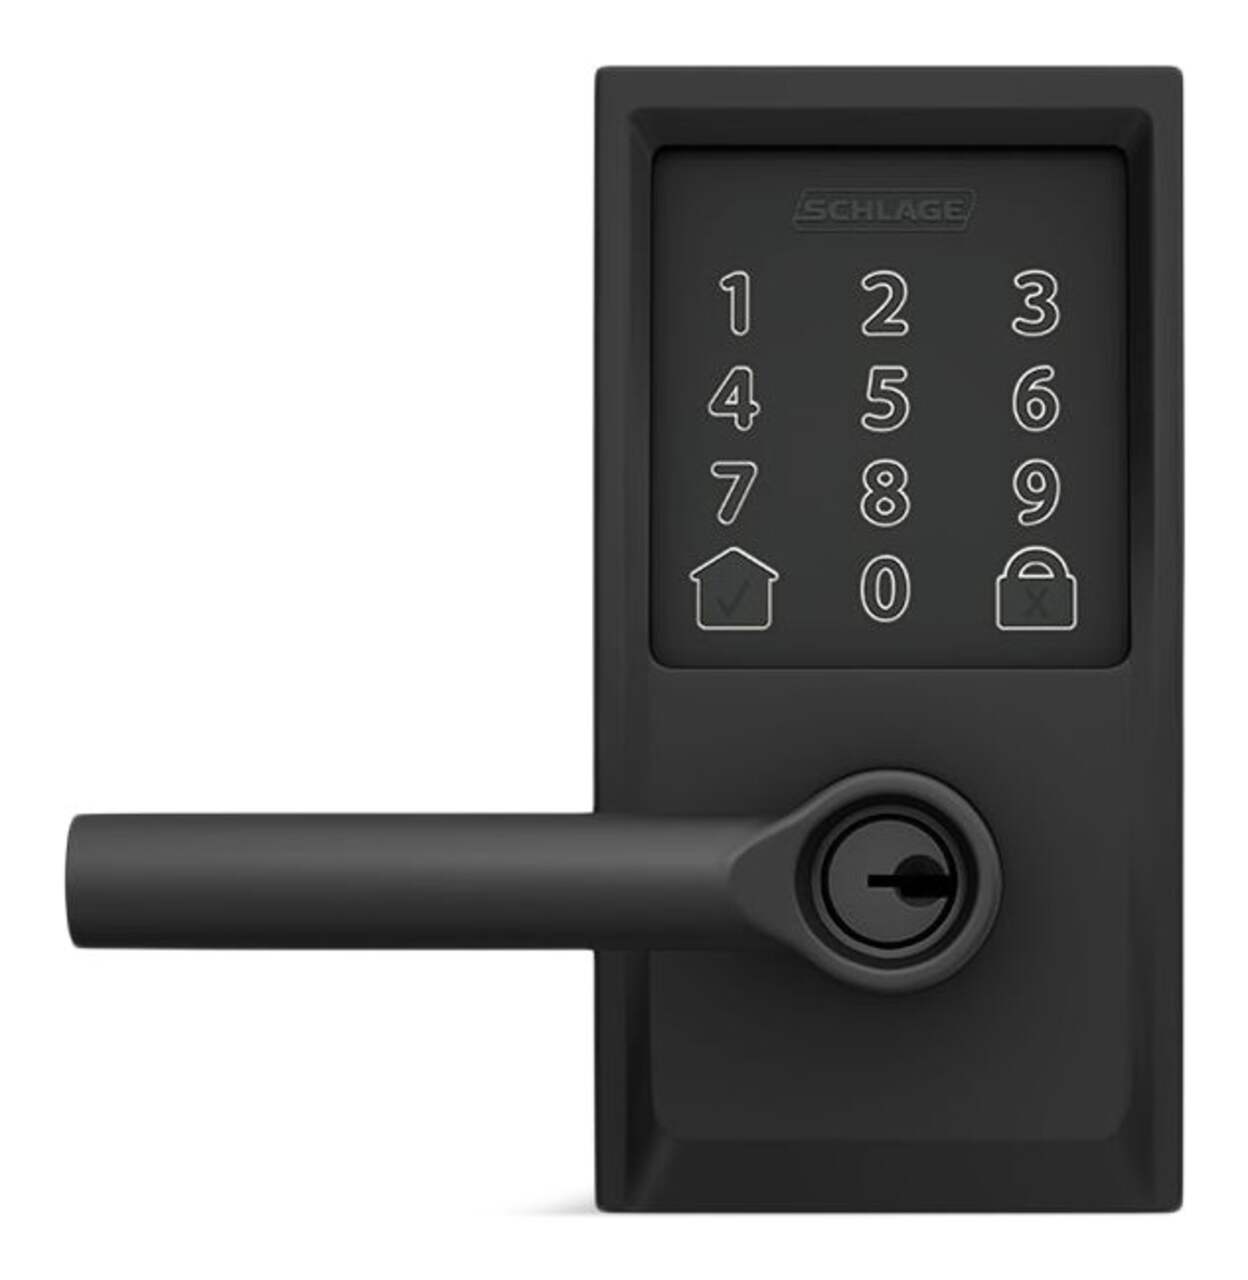 Schlage Encode Camelot Electronic Smart Touch-Screen Keypad